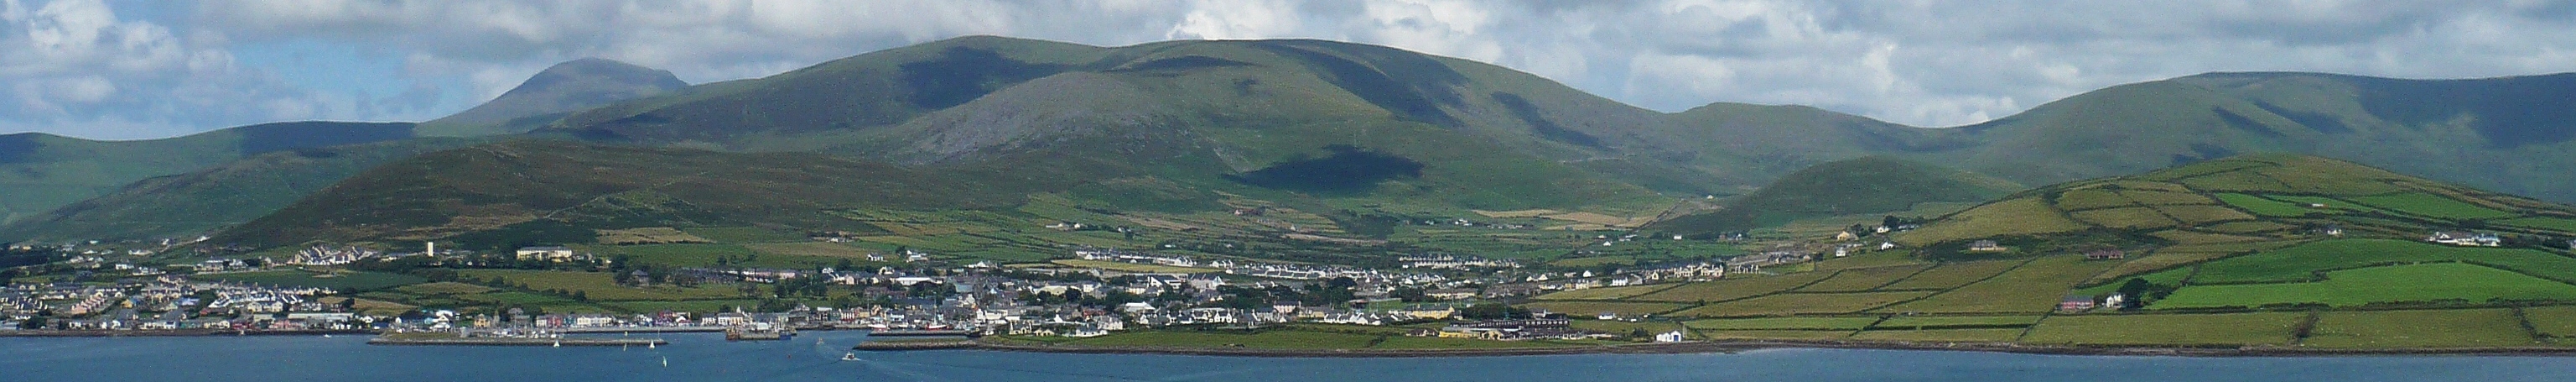 Banner showing picture of Dingle Bay, Ireland